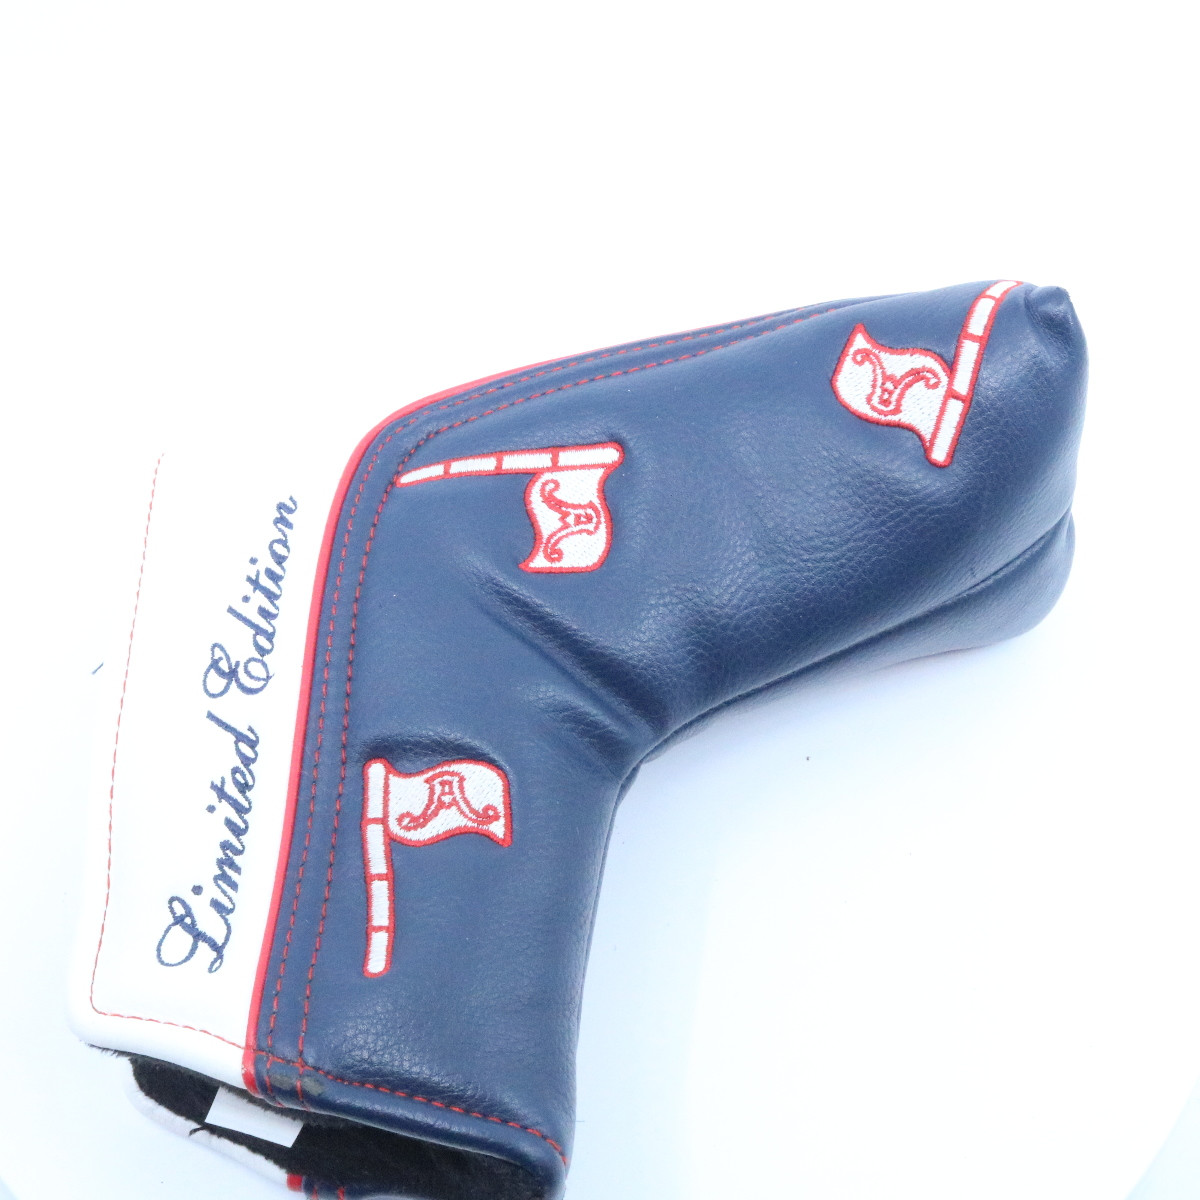 PRGR Limited Edition Blade Putter Cover Headcover Blue/Red/White HC ...